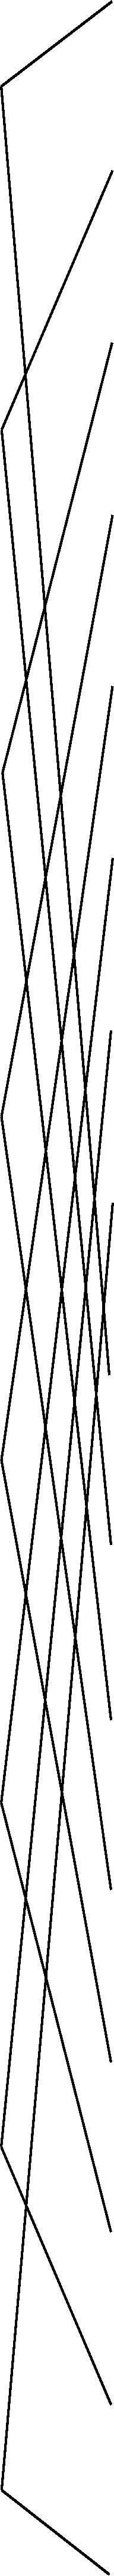 diagonal lines from 8 matches to 4+4 matches